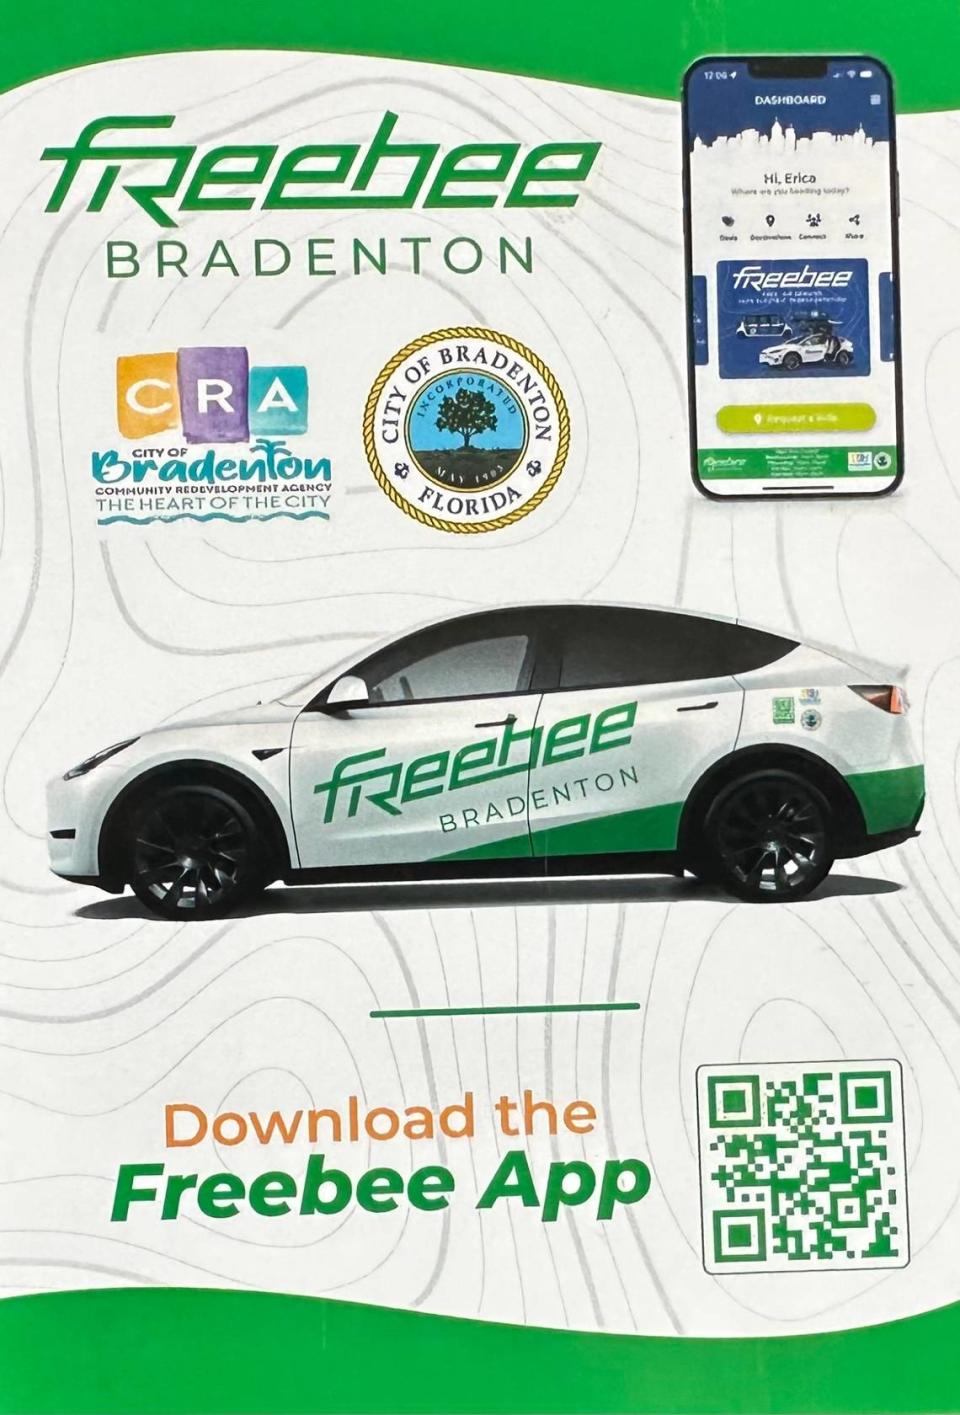 Residents who live within any of Bradenton’s community redevelopment areas are invited to download the Freebee app and take a free ride to the grocery.